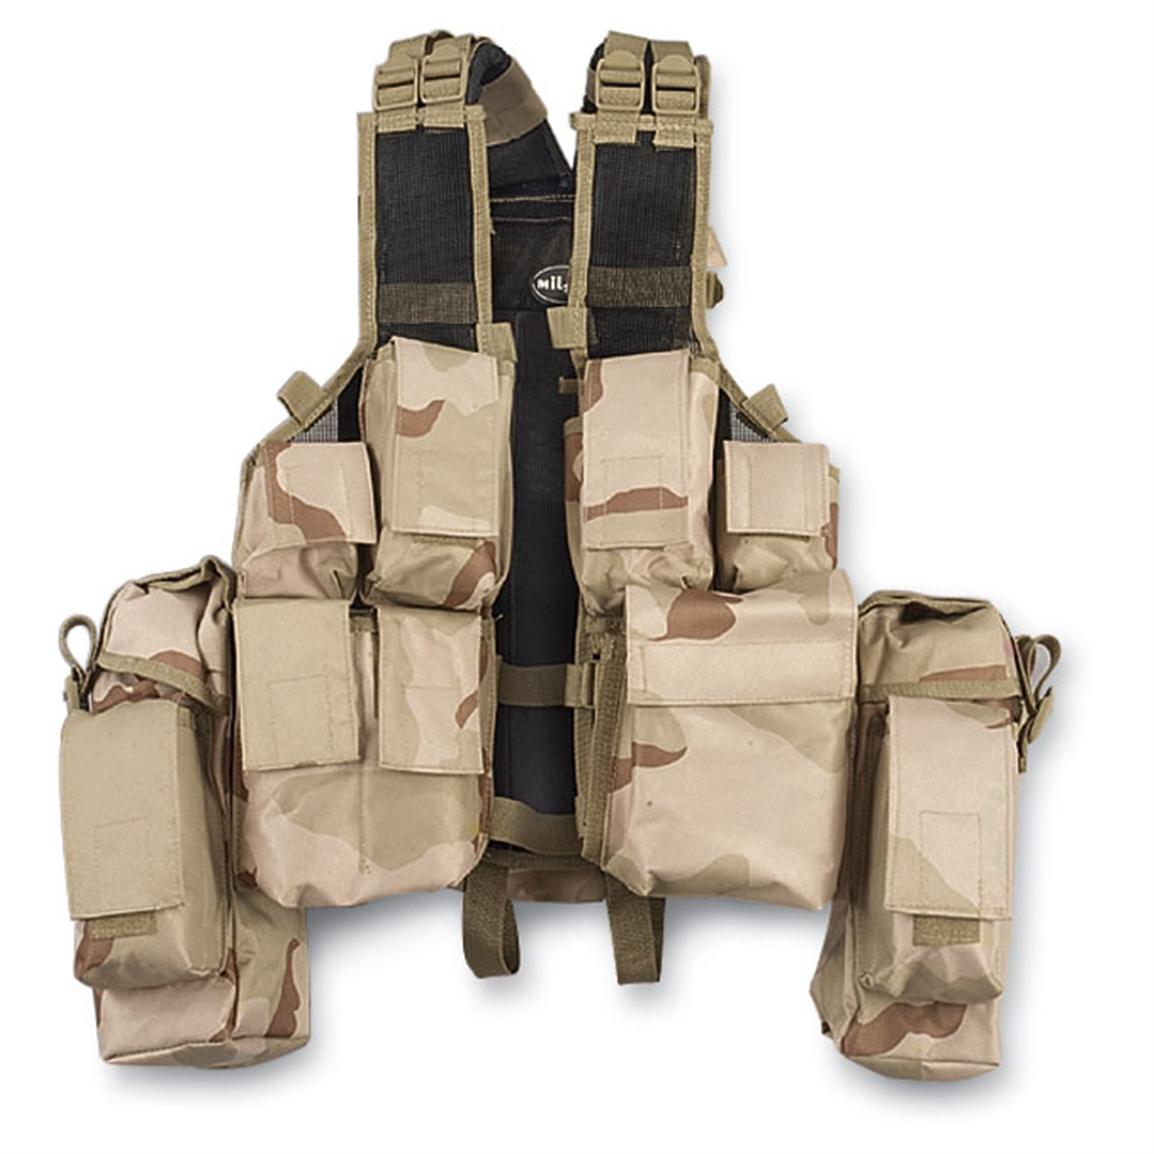 Mil - Tec® Military - Style Tactical Vest, 3 - Color Desert Camo - 165833, Tactical Gear At ...